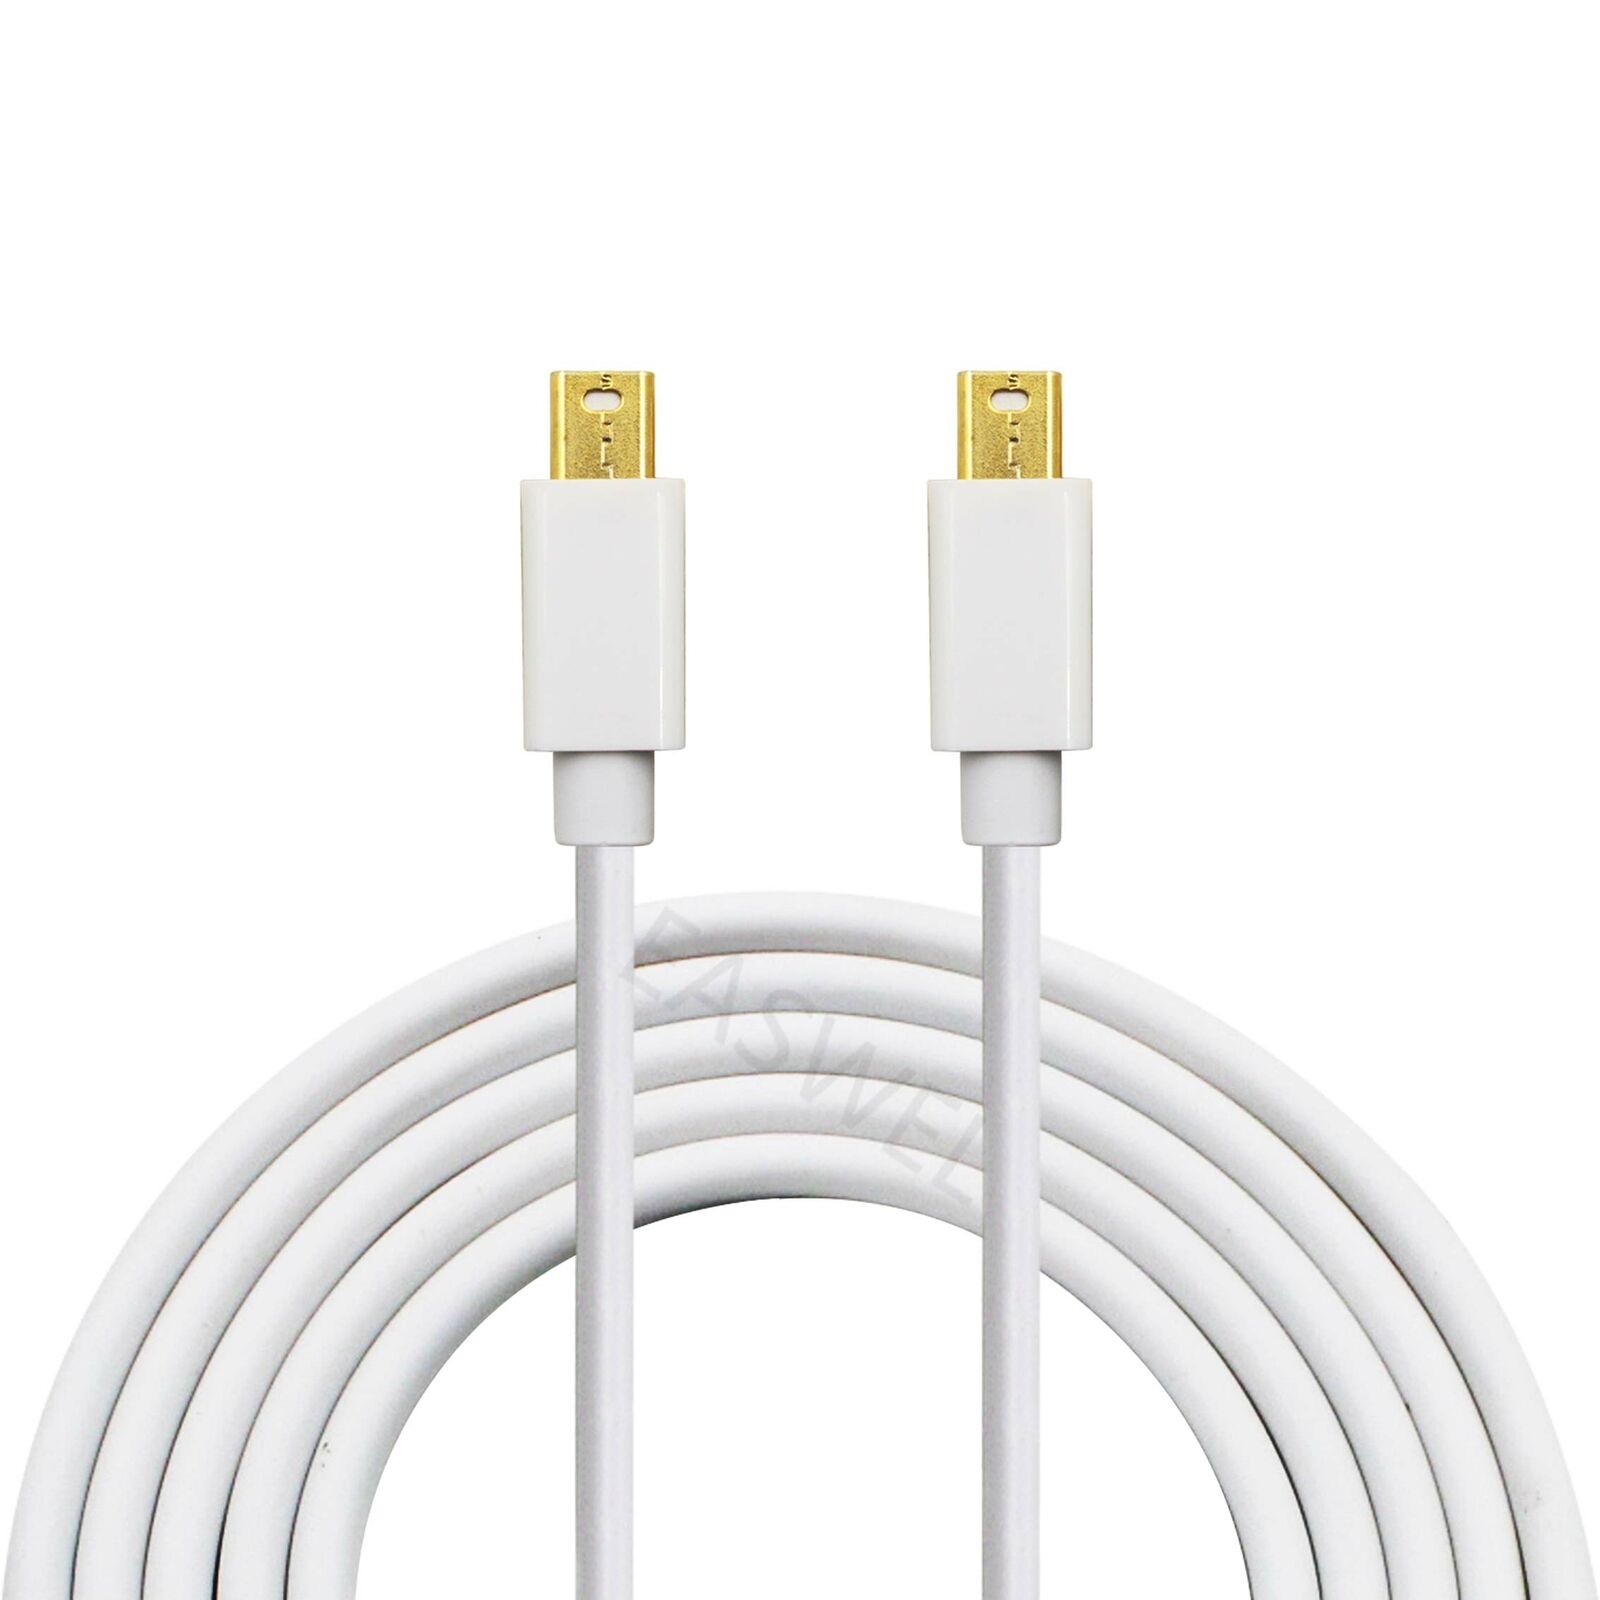 Thunderbolt 2 OEM Cable Male to Male 6FT